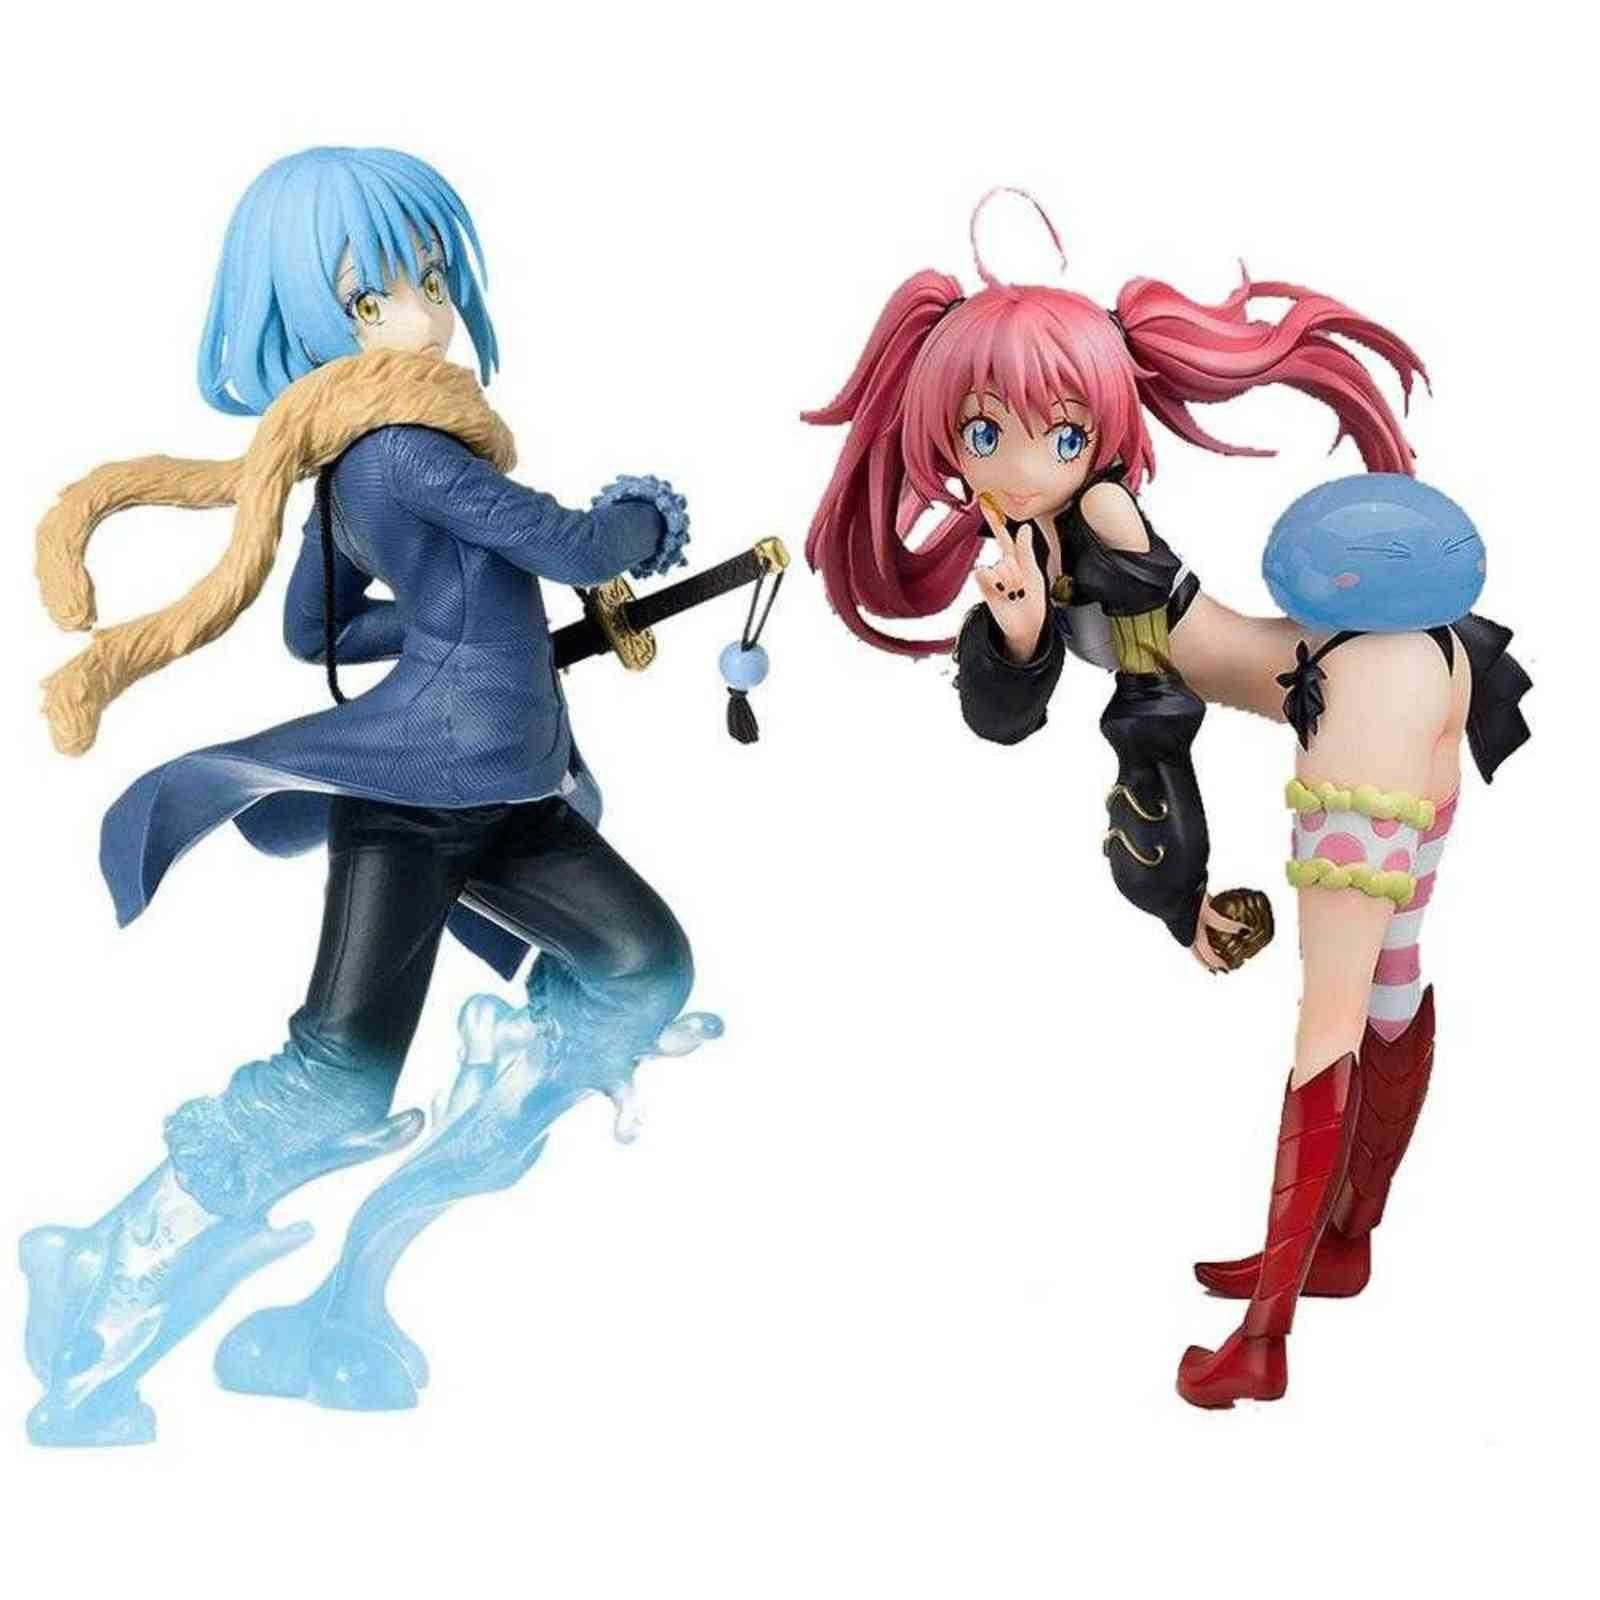 

Toy Figures That Time I Got Reincarnated as a Slime Rimuru Tempest Milim Nava Anime PVC Action Figure Toy New Collection Gifts H1105, Multicolor